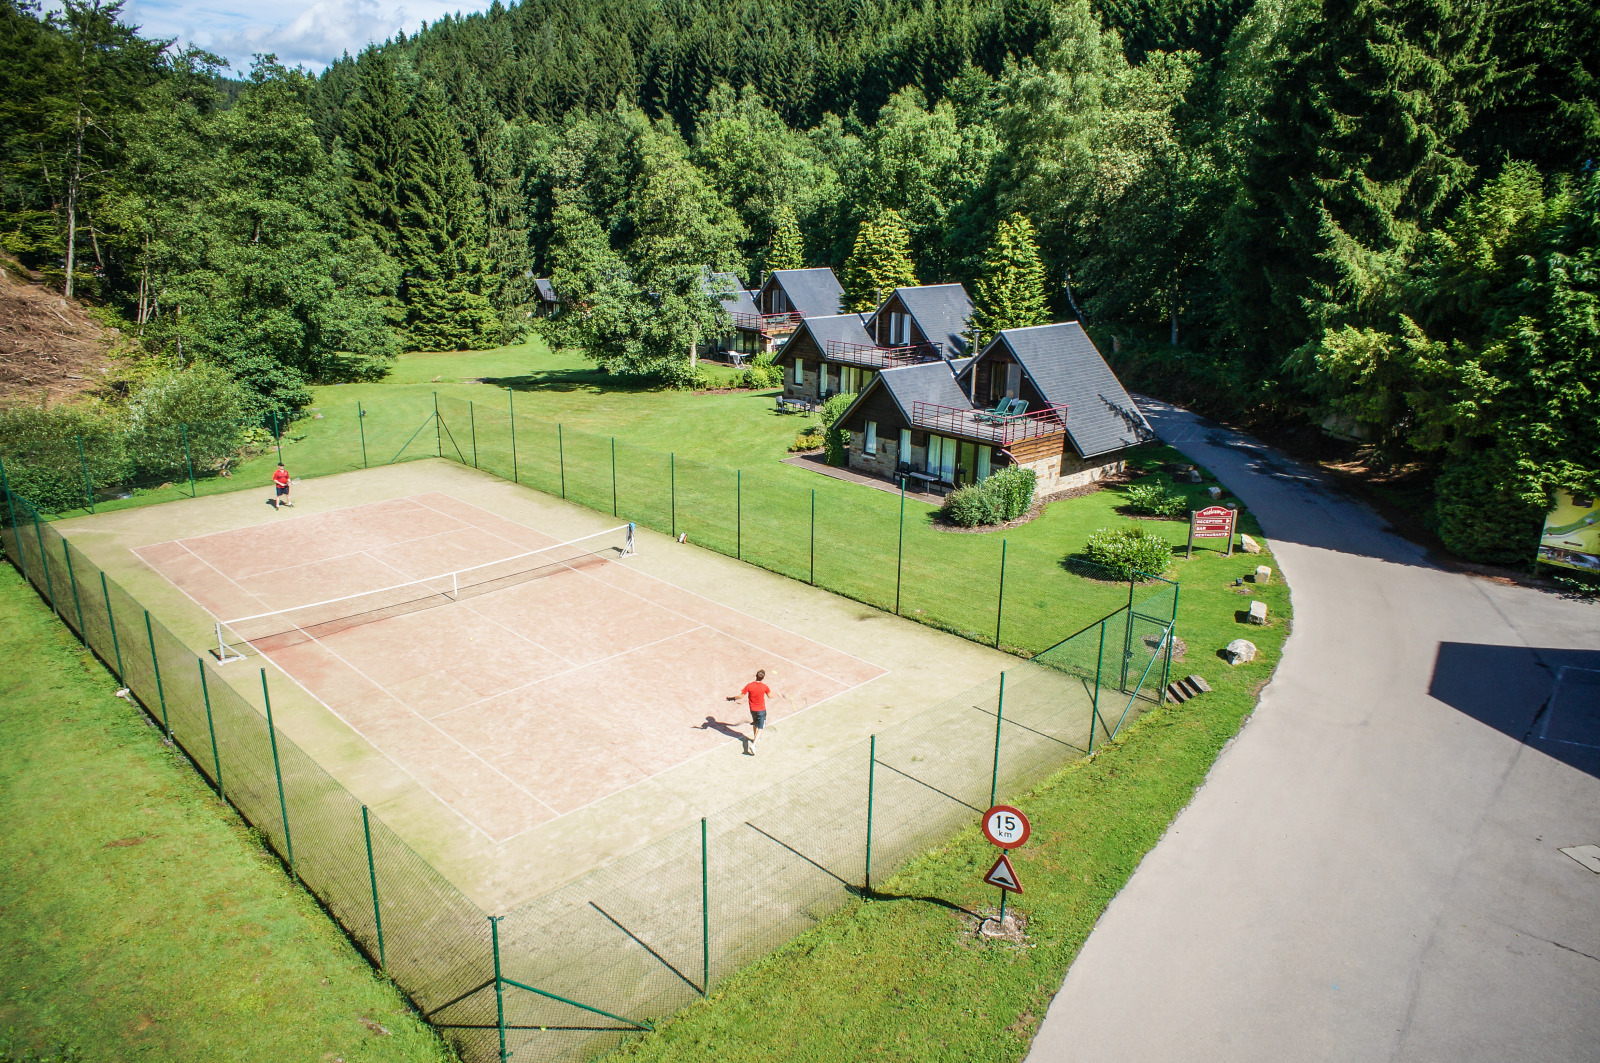 Aerial view of the tennis court of the Val d'Arimont holiday village in Malmedy